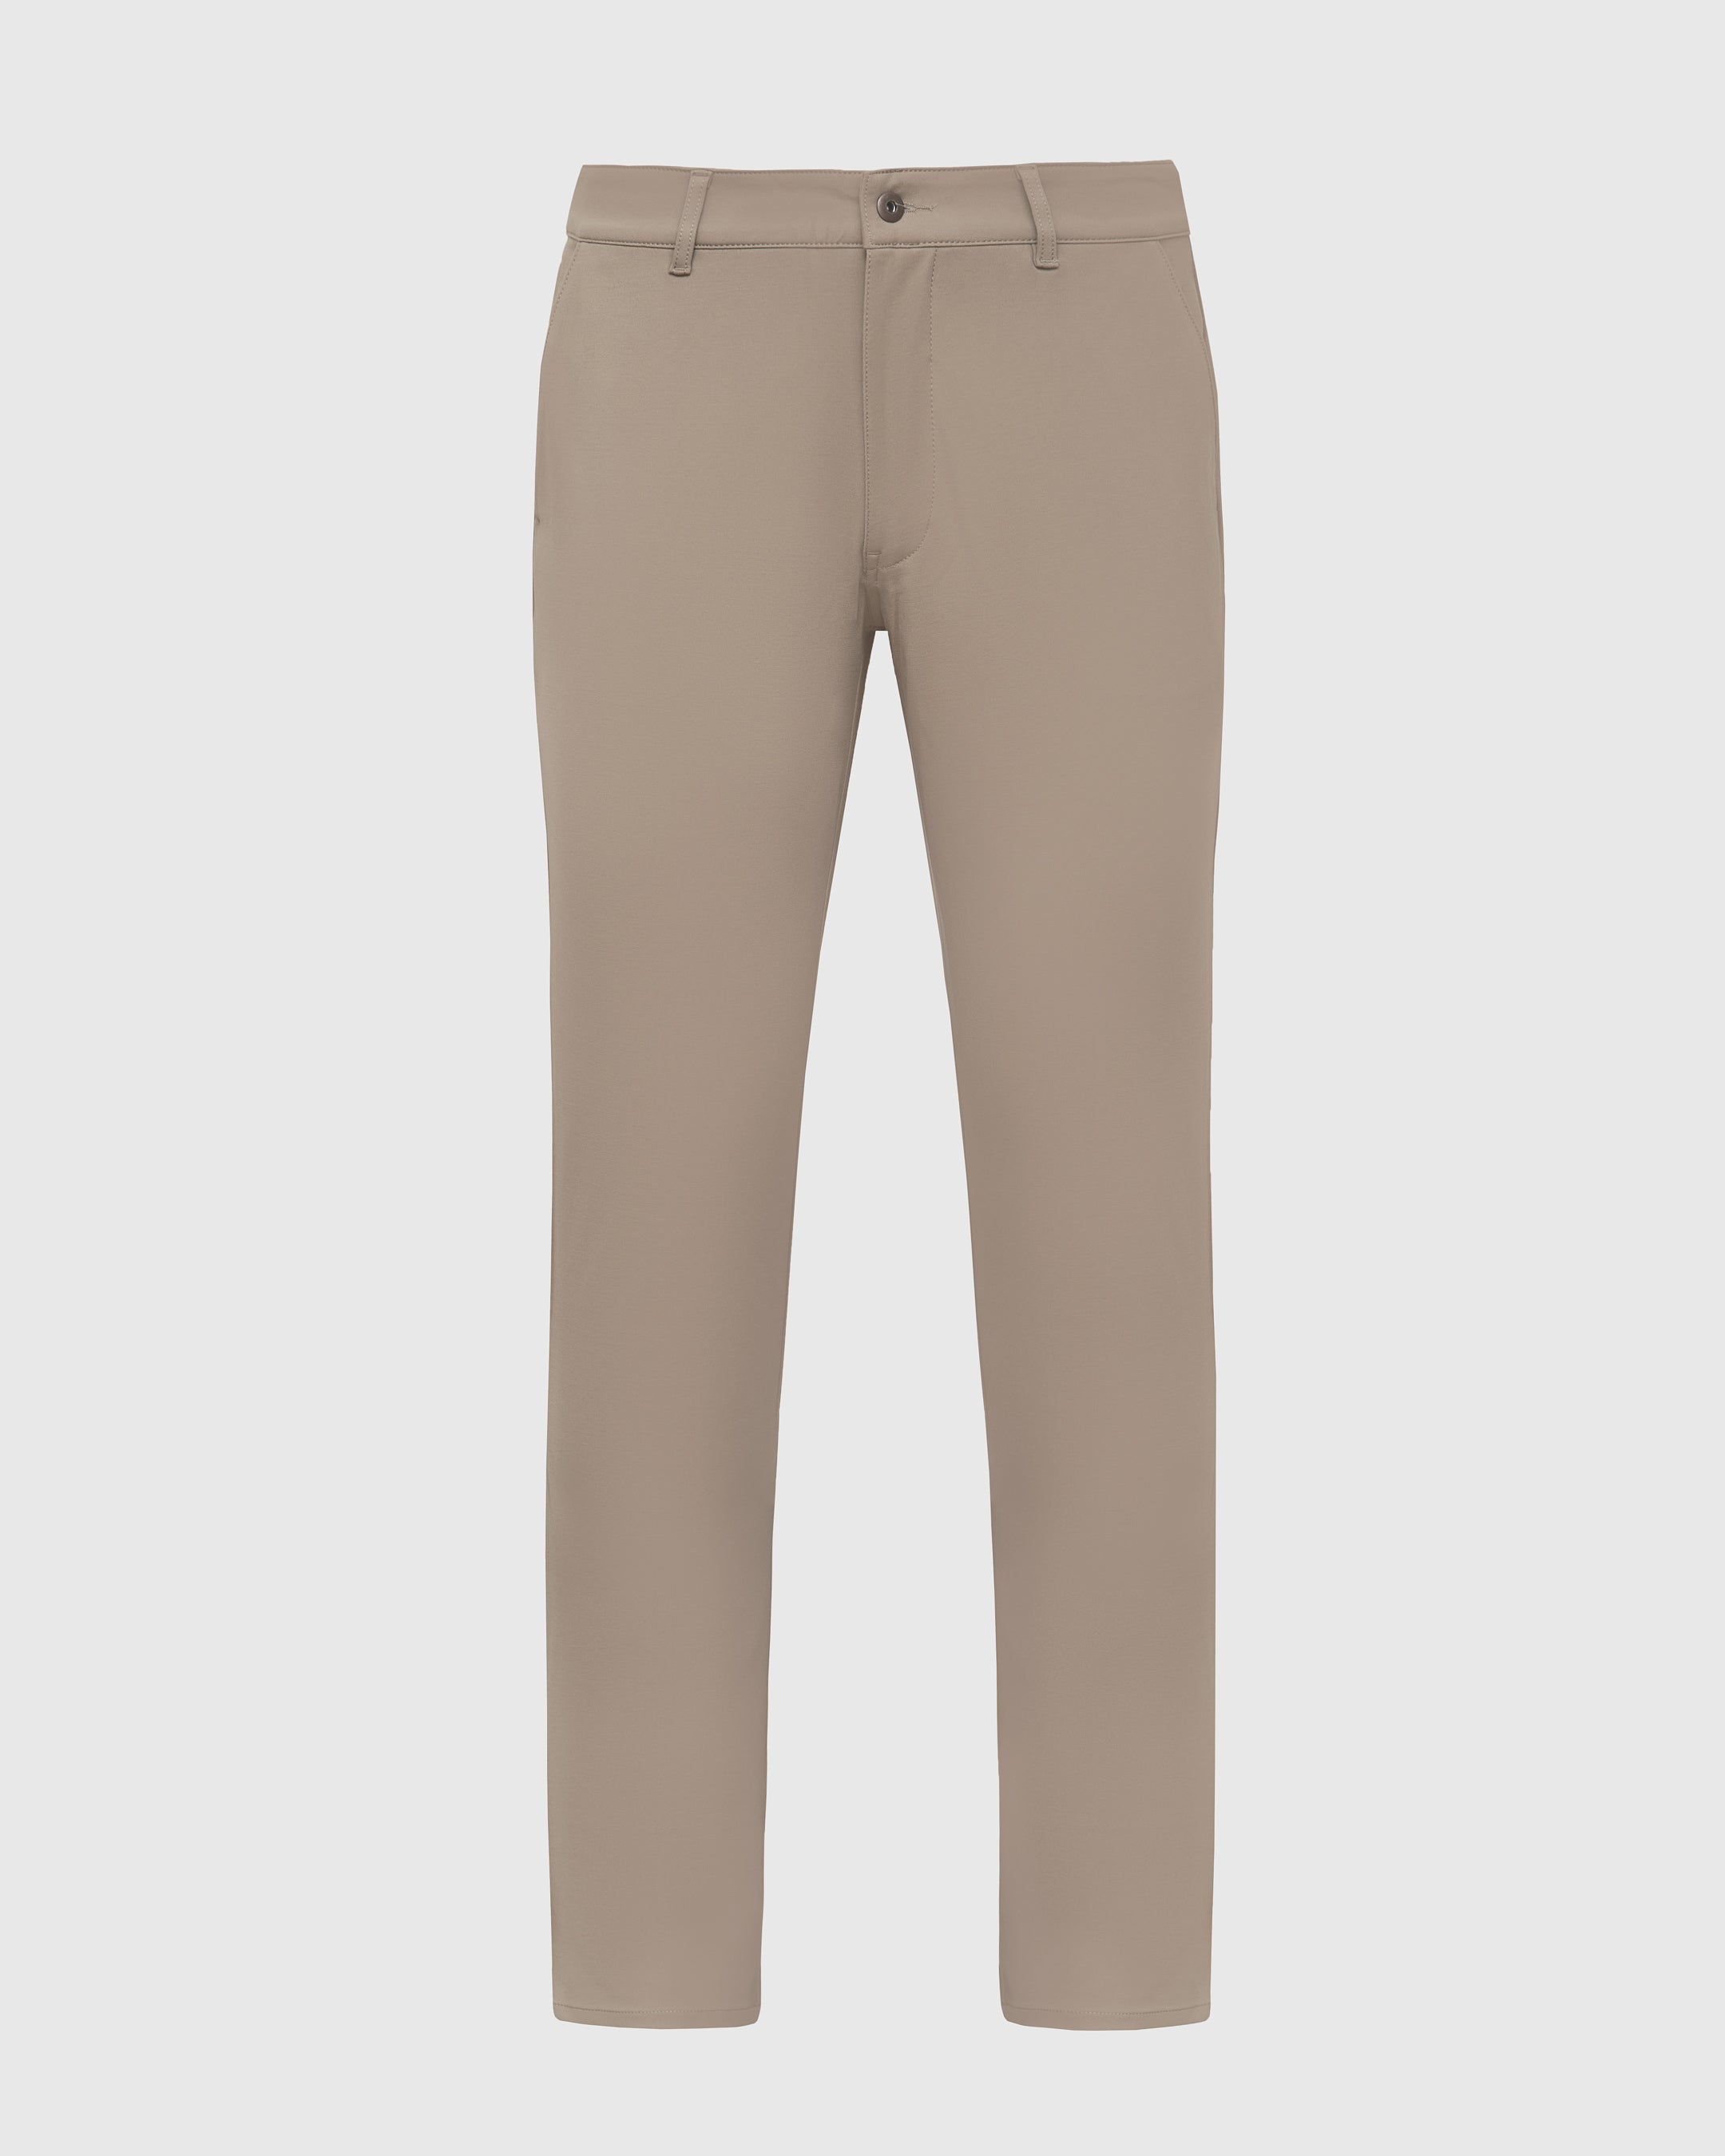 X Ray Men's Commuter Pants With Cargo Pockets In Khaki Size 34x30 : Target